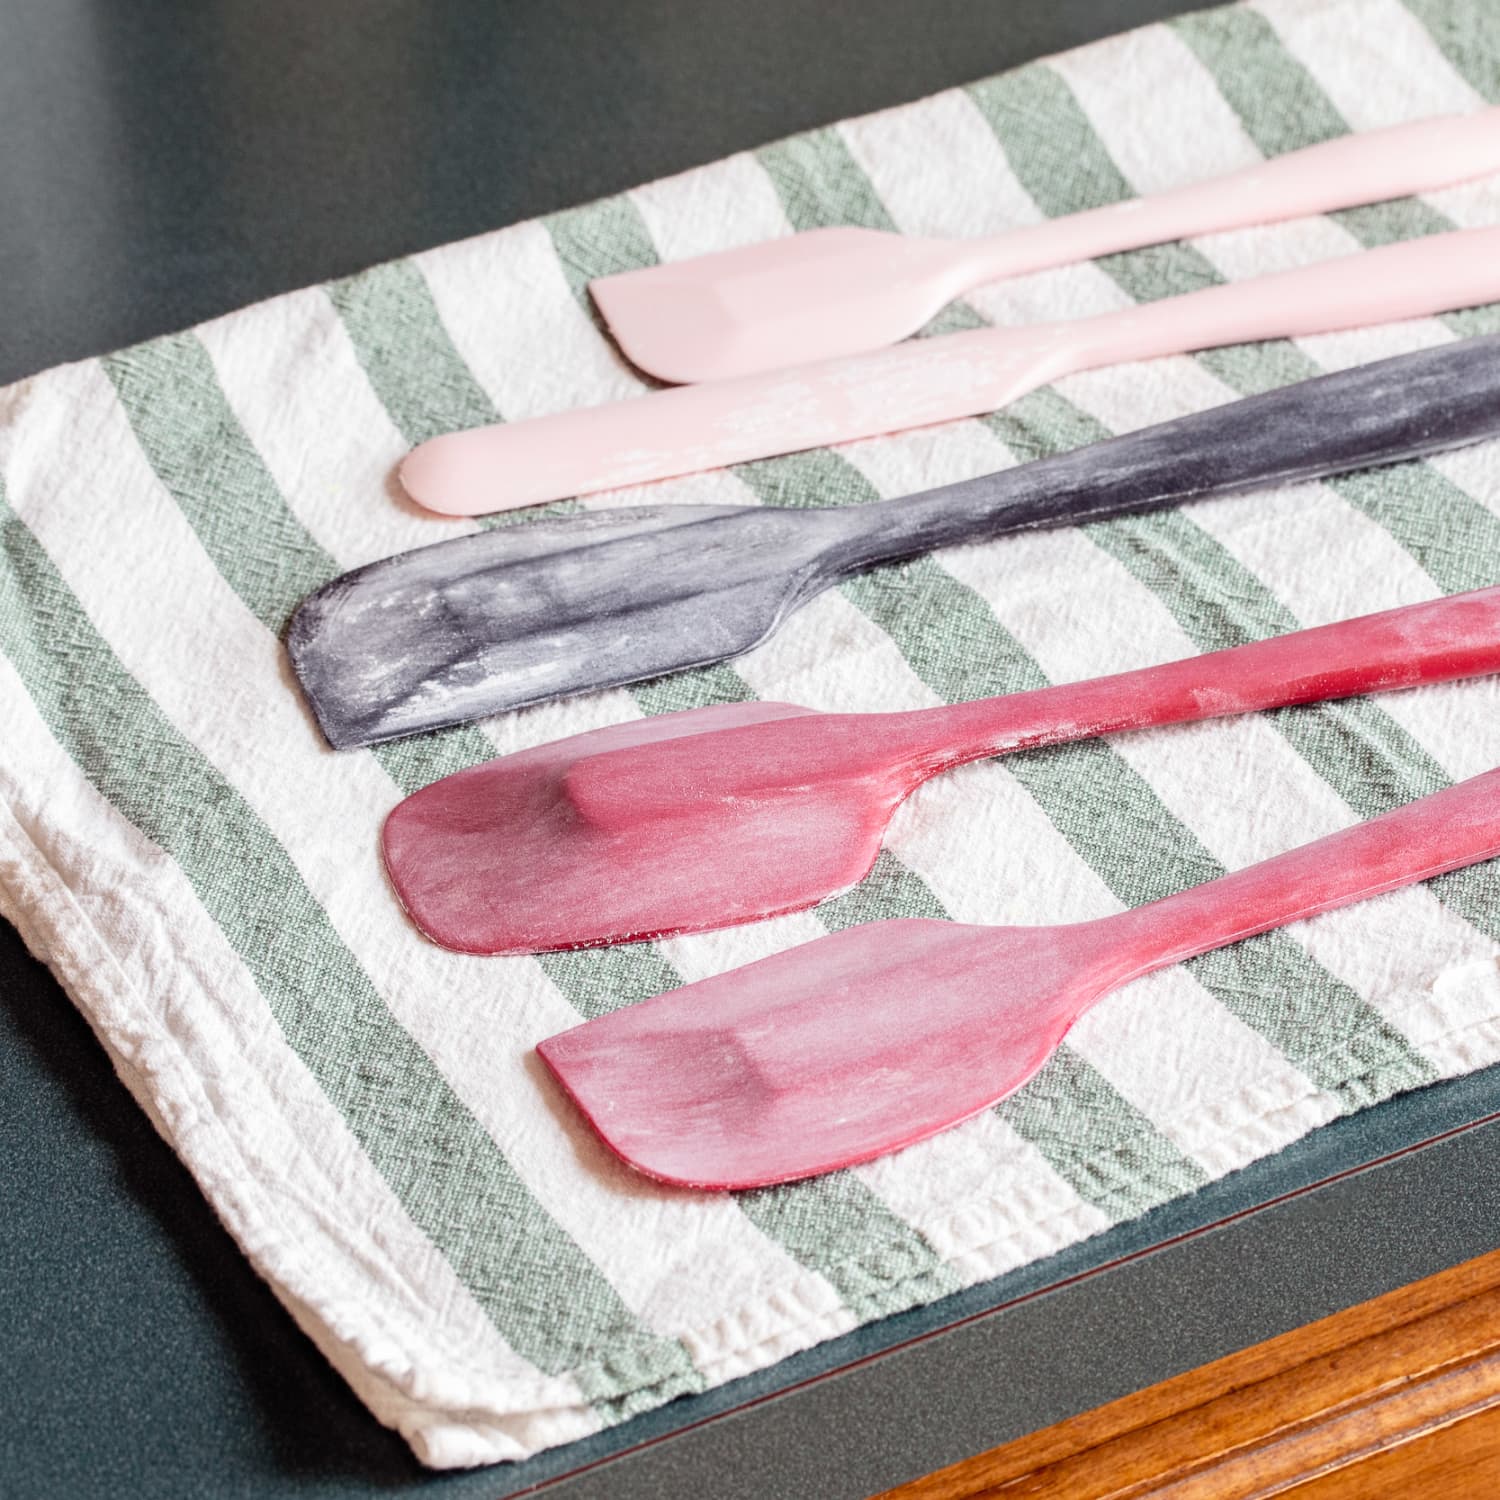 how-to-clean-a-spatula